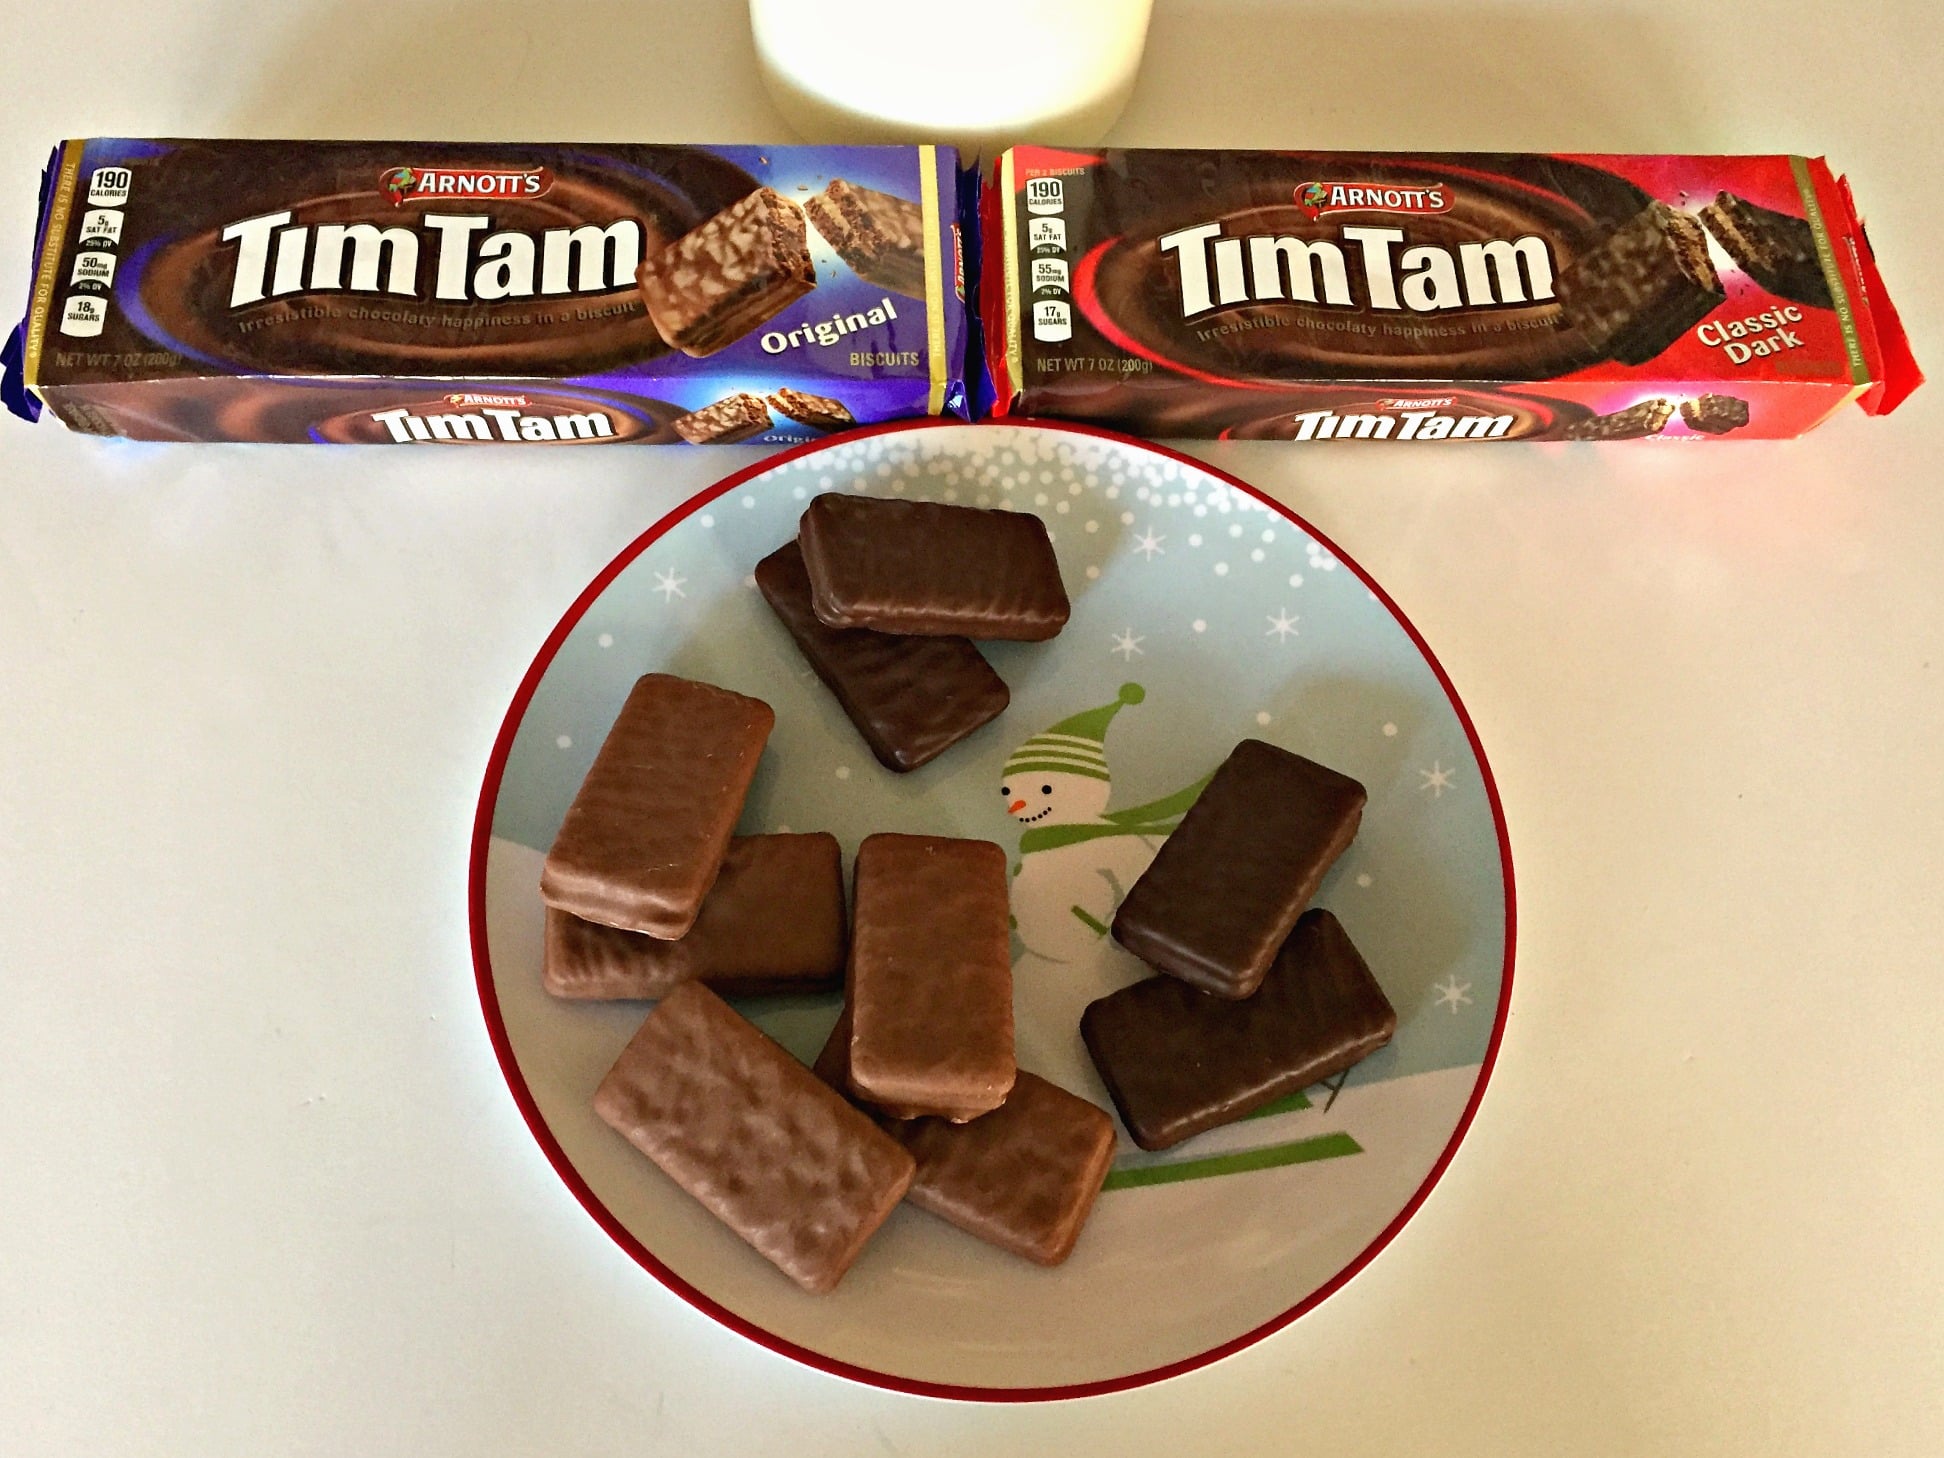 Tim Tam Biscuits buy 2 for $5 at Publix deal for the holidays